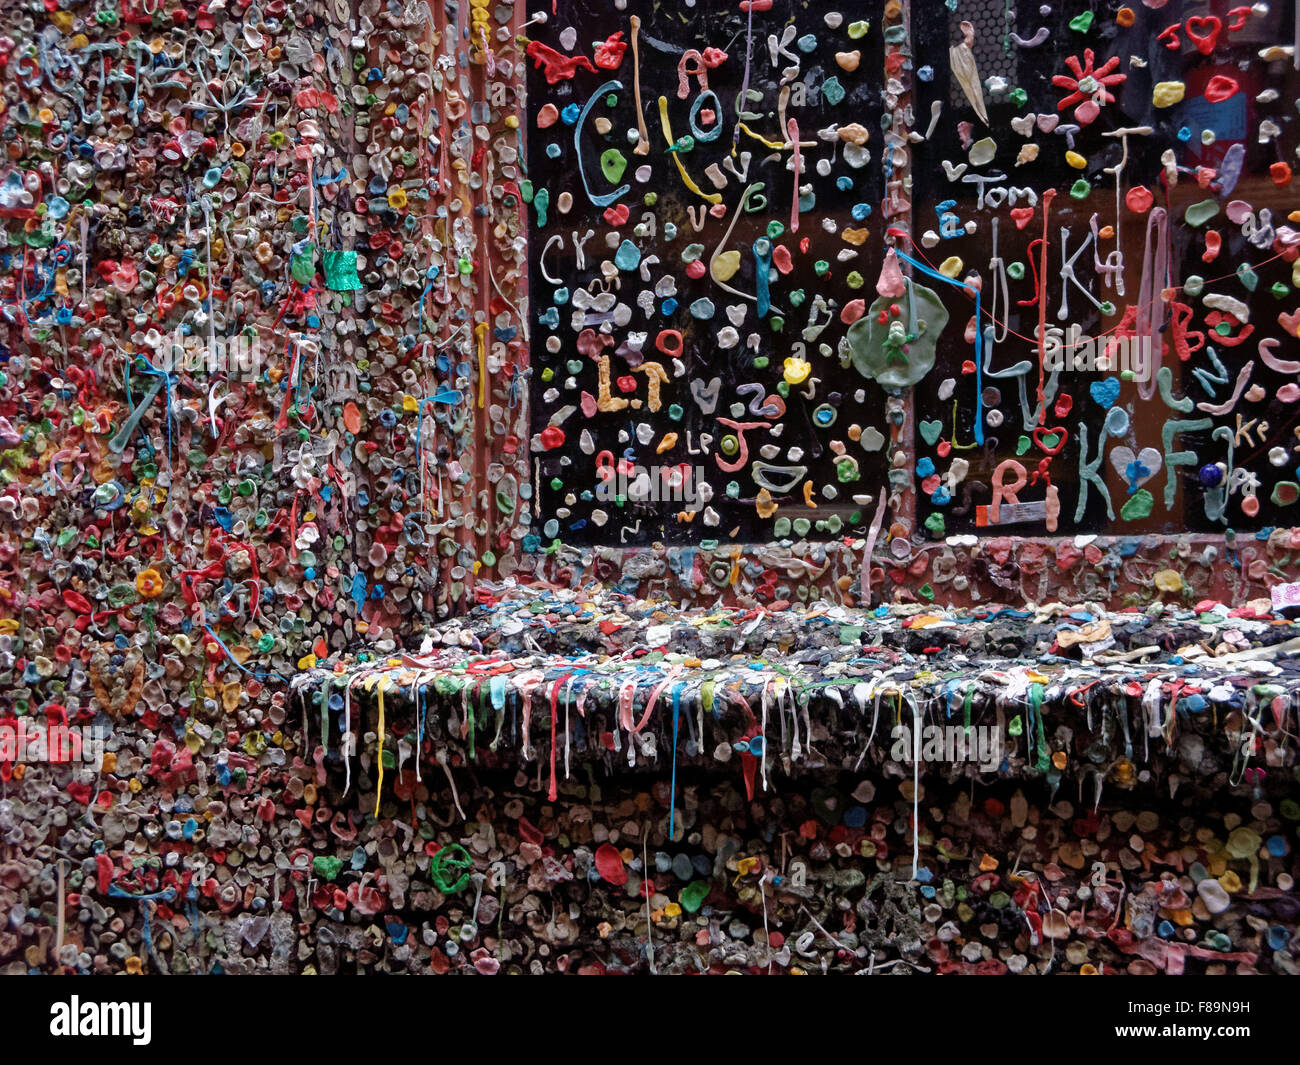 The Pike Place Market Theater Gum Wall in Seattle, Washington is covered in used chewing gum,. Stock Photo